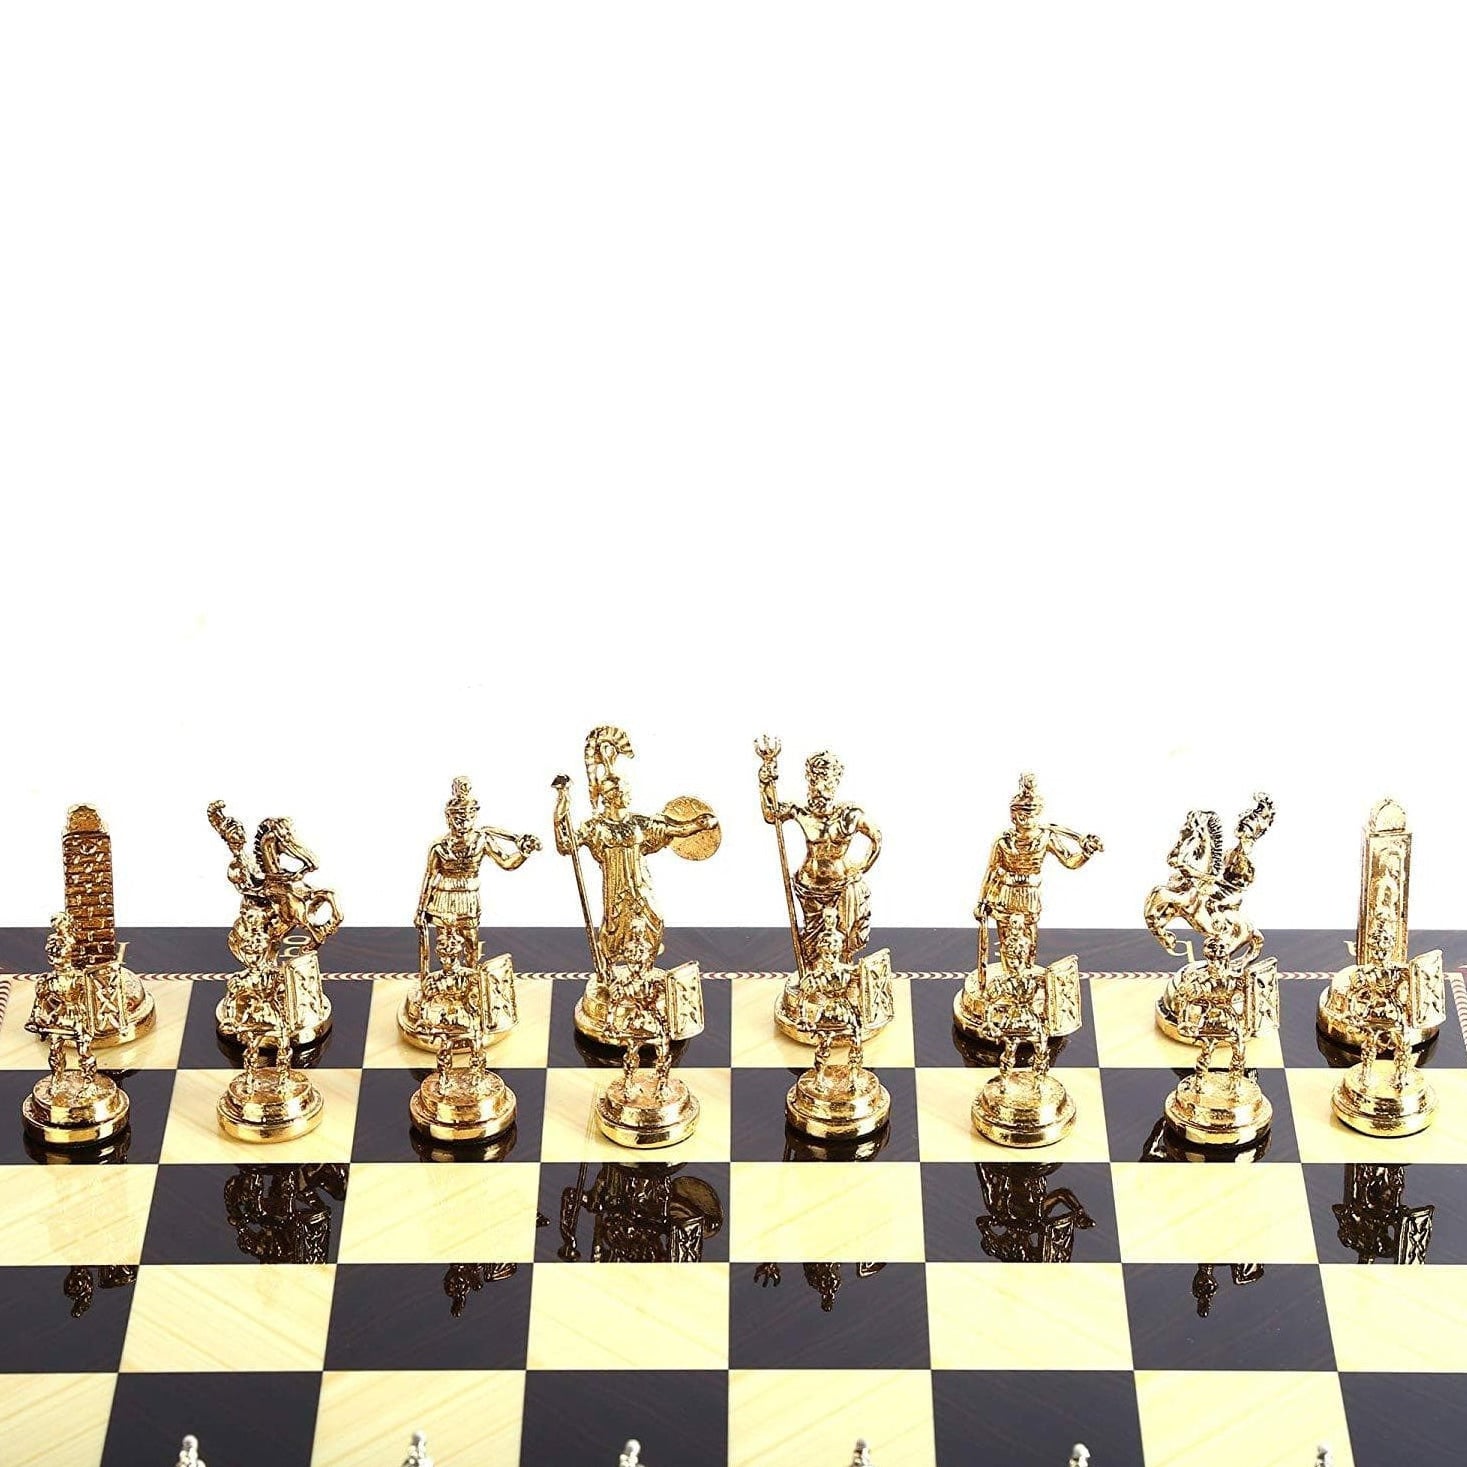 Prehistorical Roman Chess Pieces | Choose Board Or Pieces Or Both | whatagift.com.au.